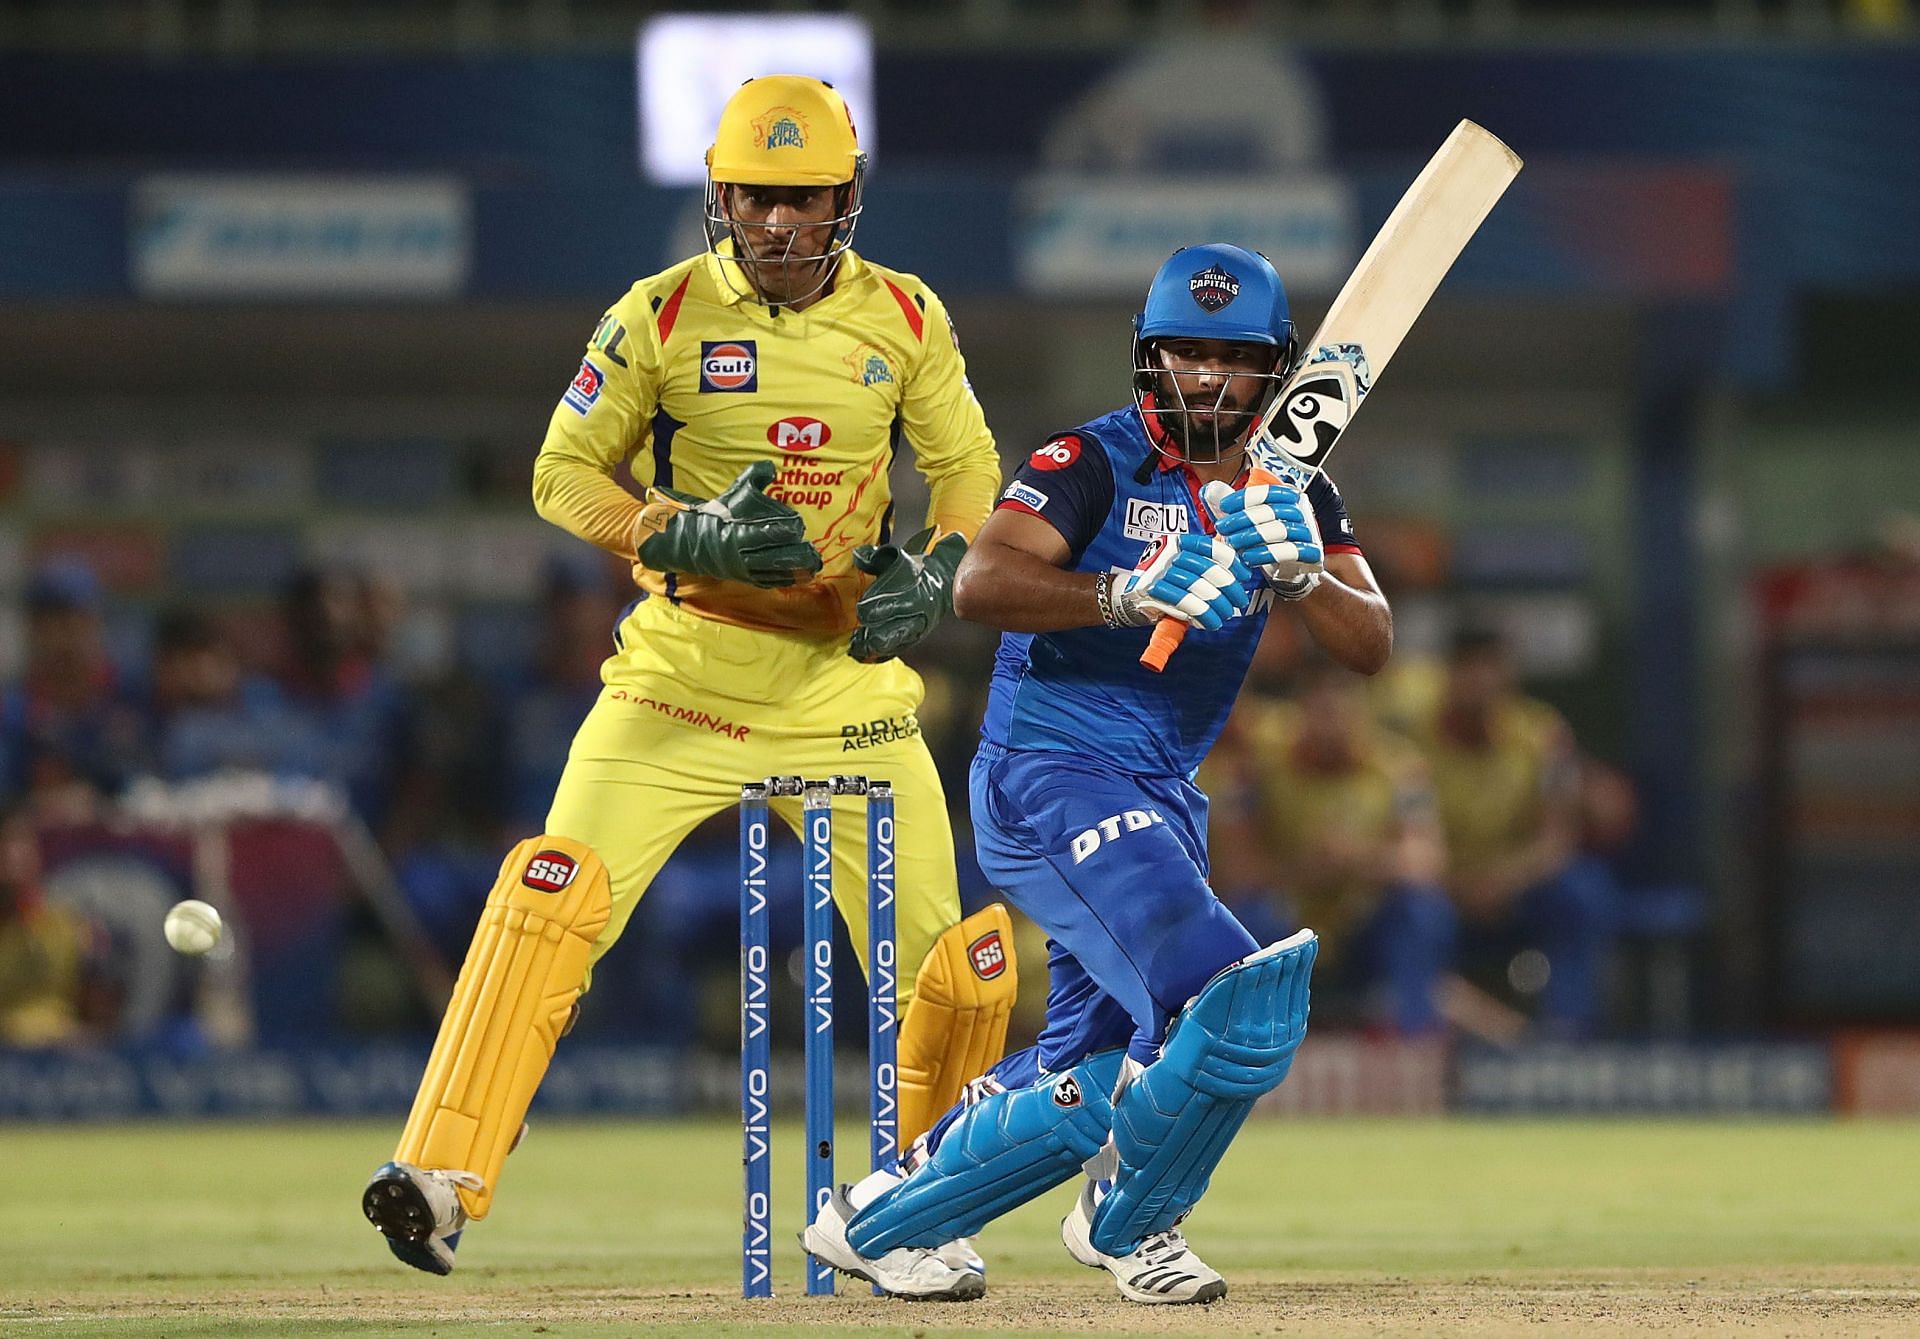 Rishabh Pant has great potential to lead Delhi Capitals to their maiden IPL trophy. Getty Images